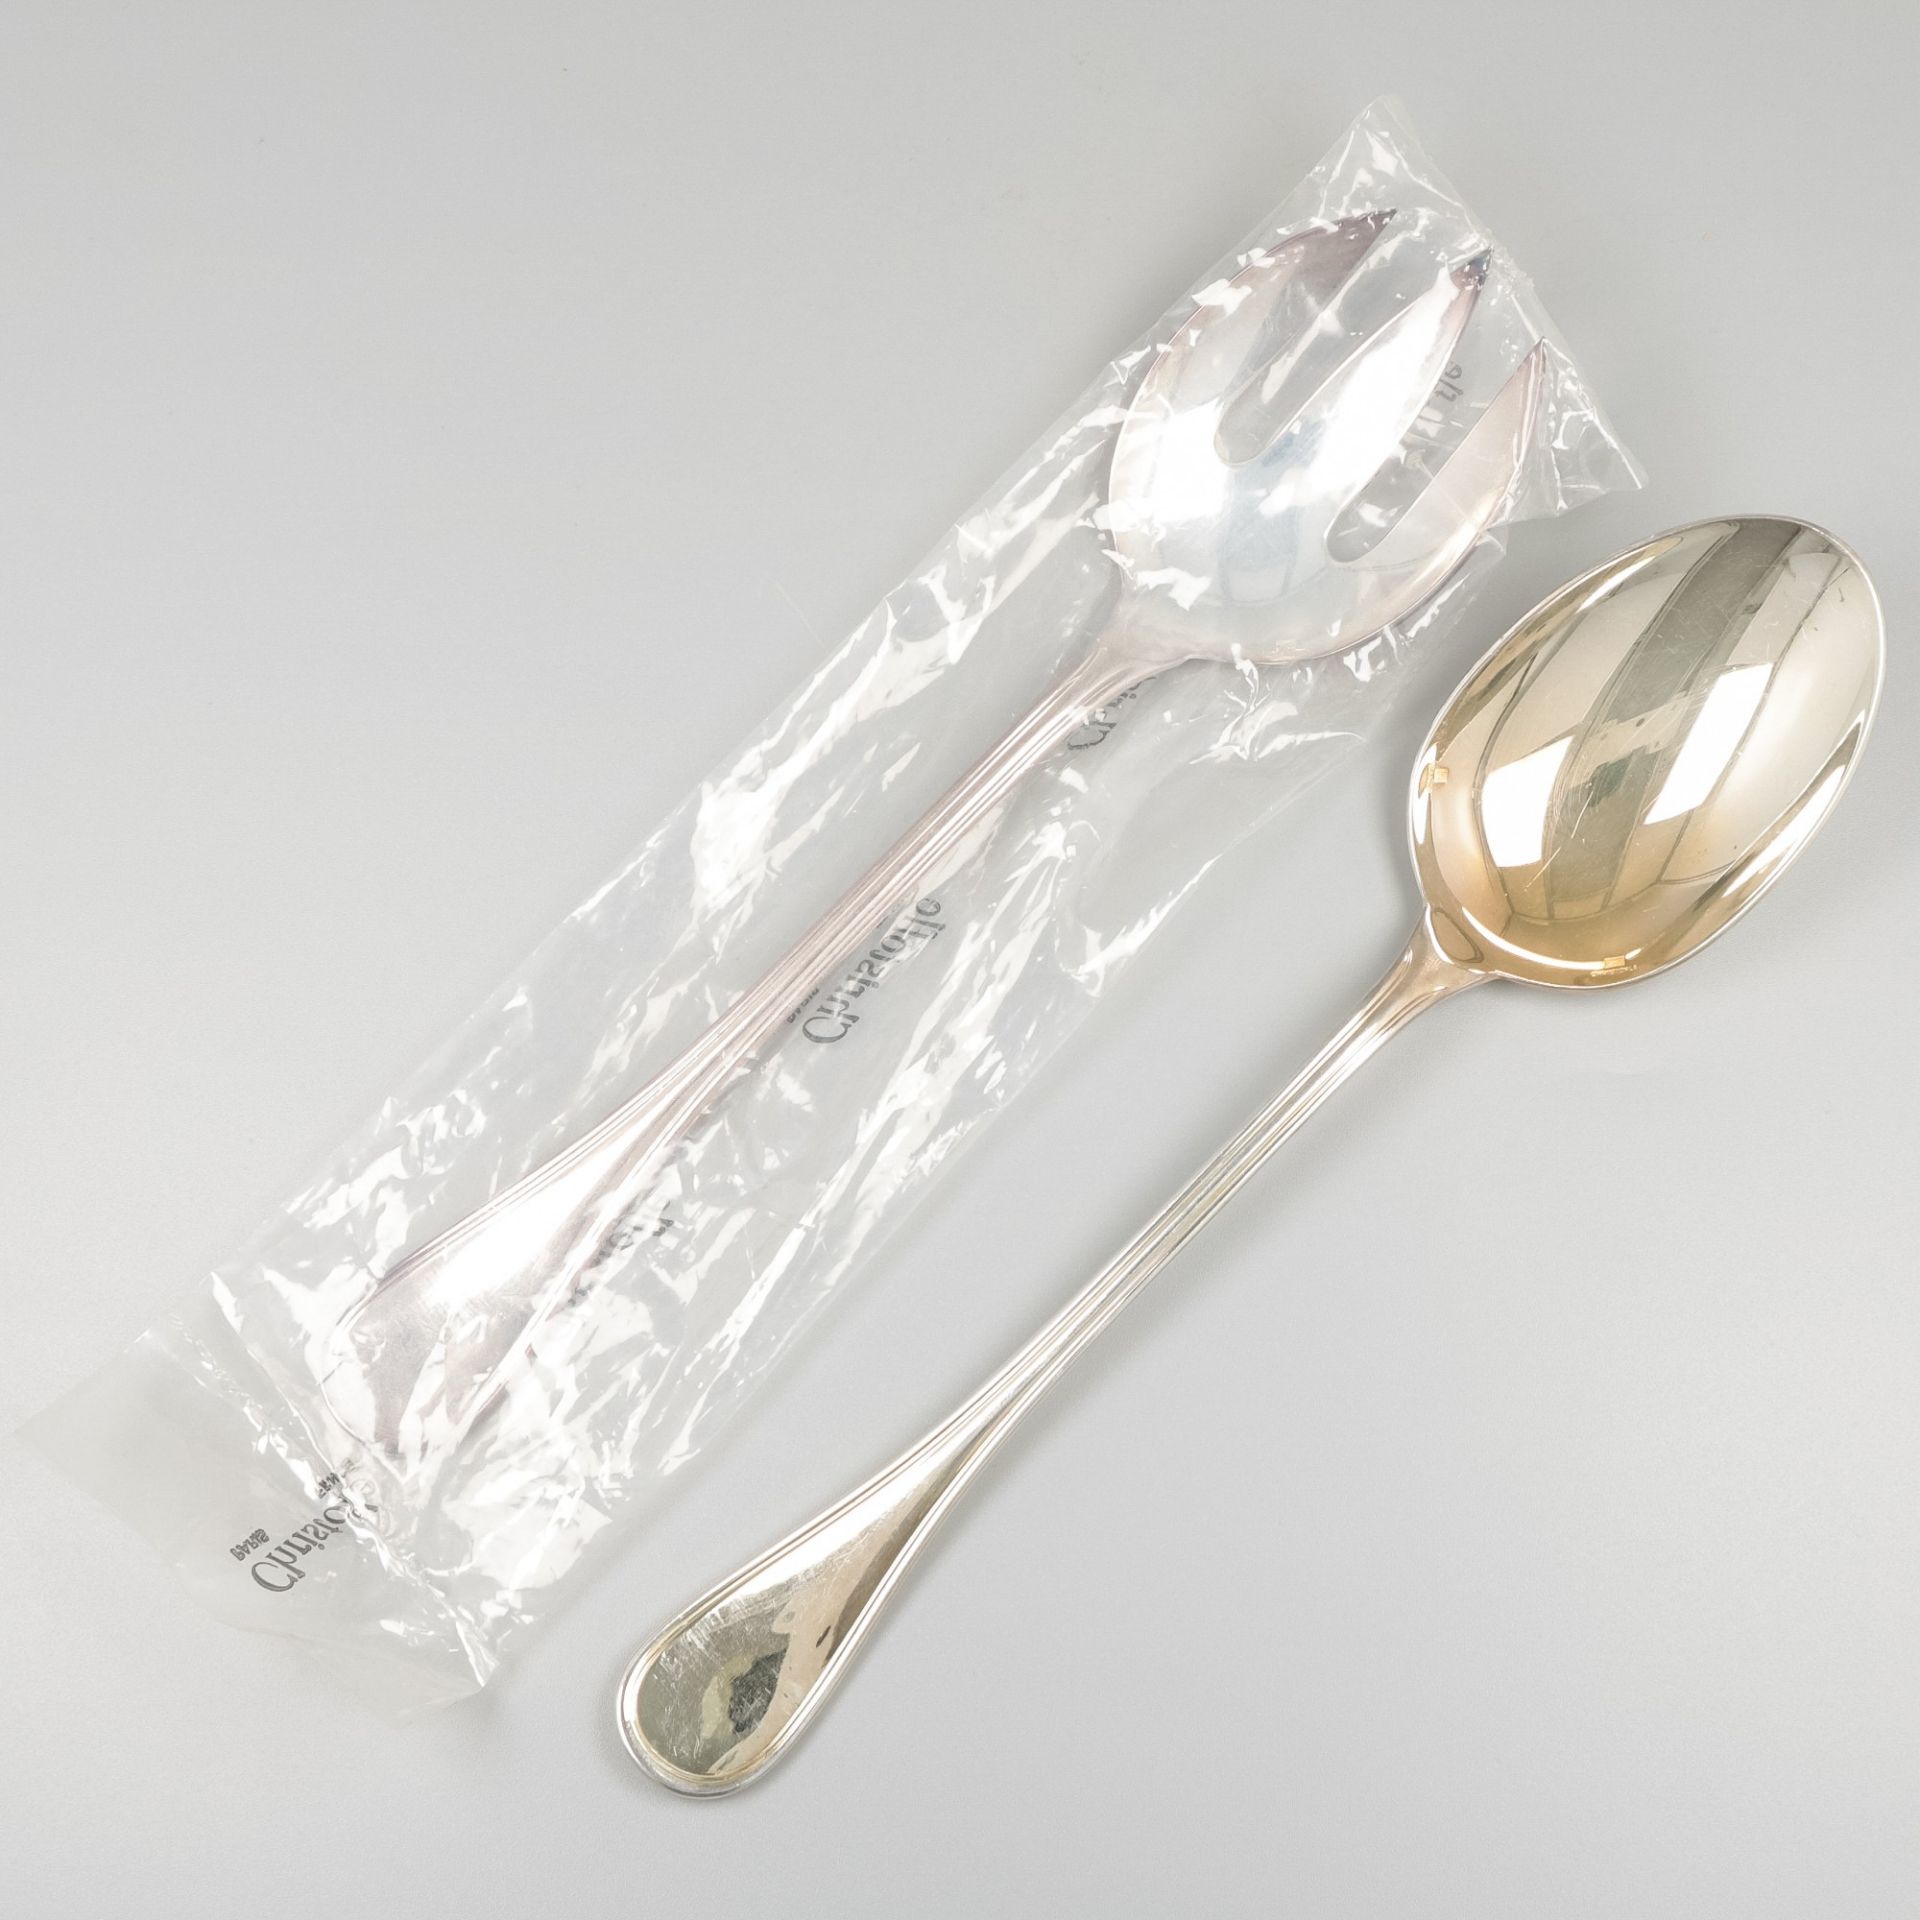 Christofle 2-piece salad serving cutlery, model Albi, silver-plated.